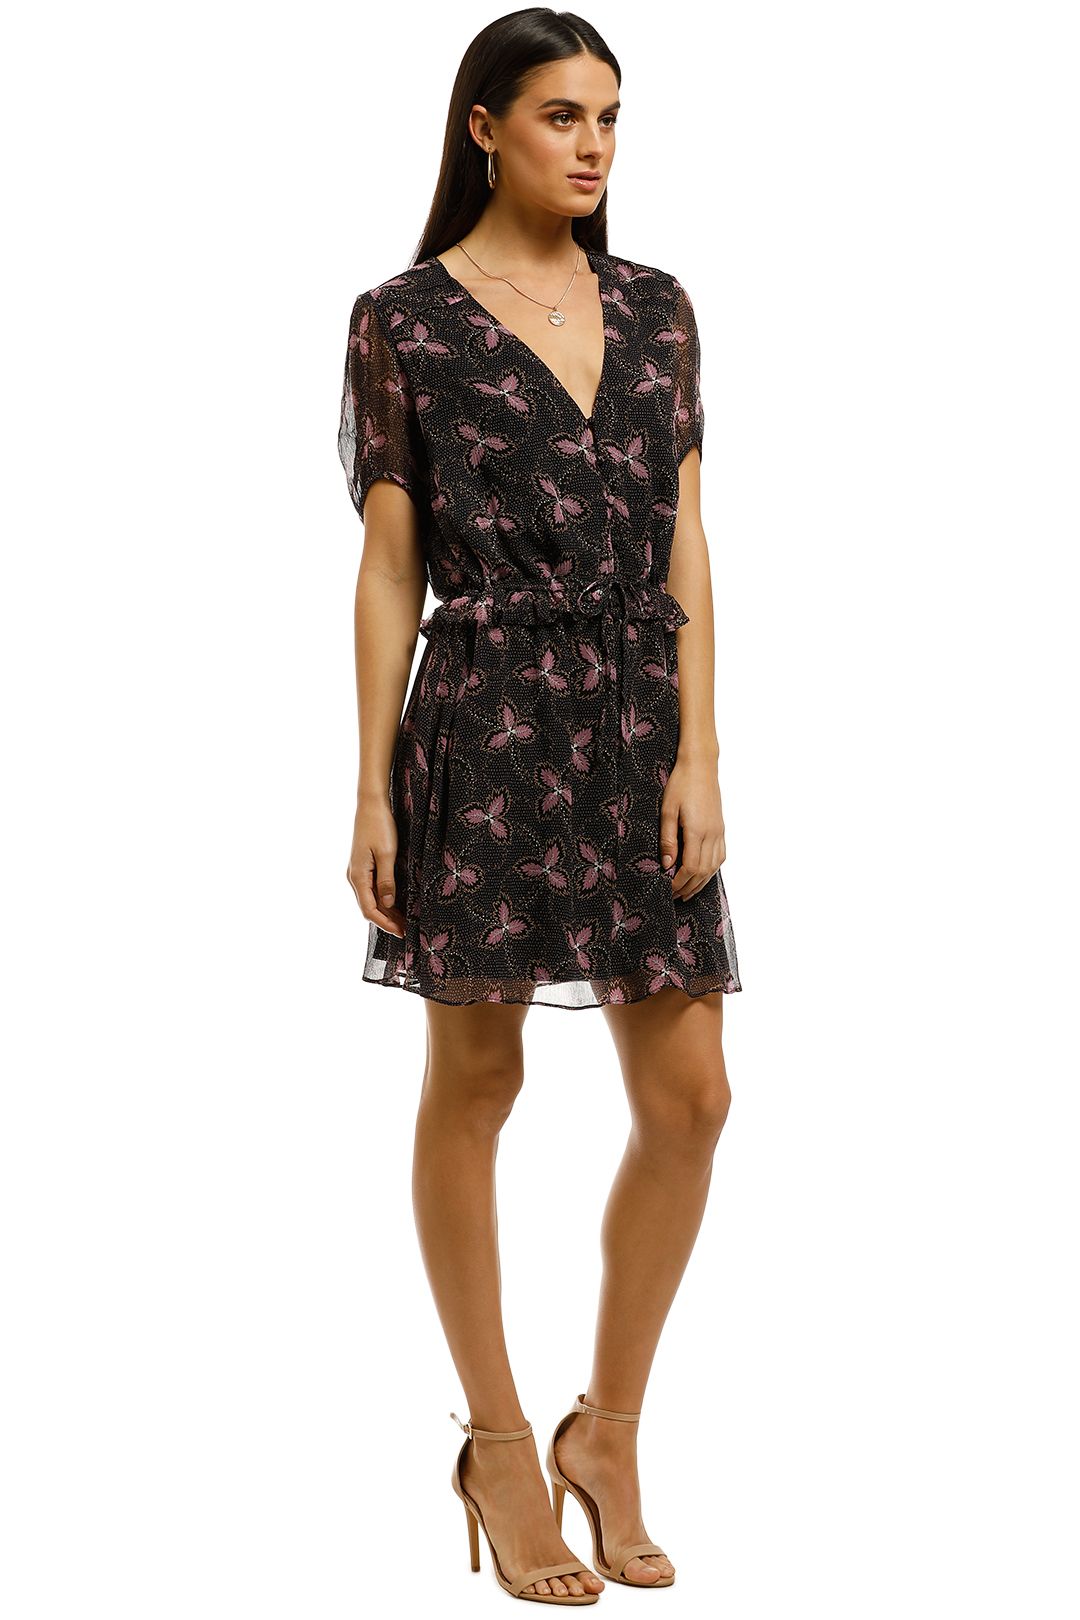 Stevie-May-Admire-Her-Mini-Dress-Purple-Floral-Black-Side